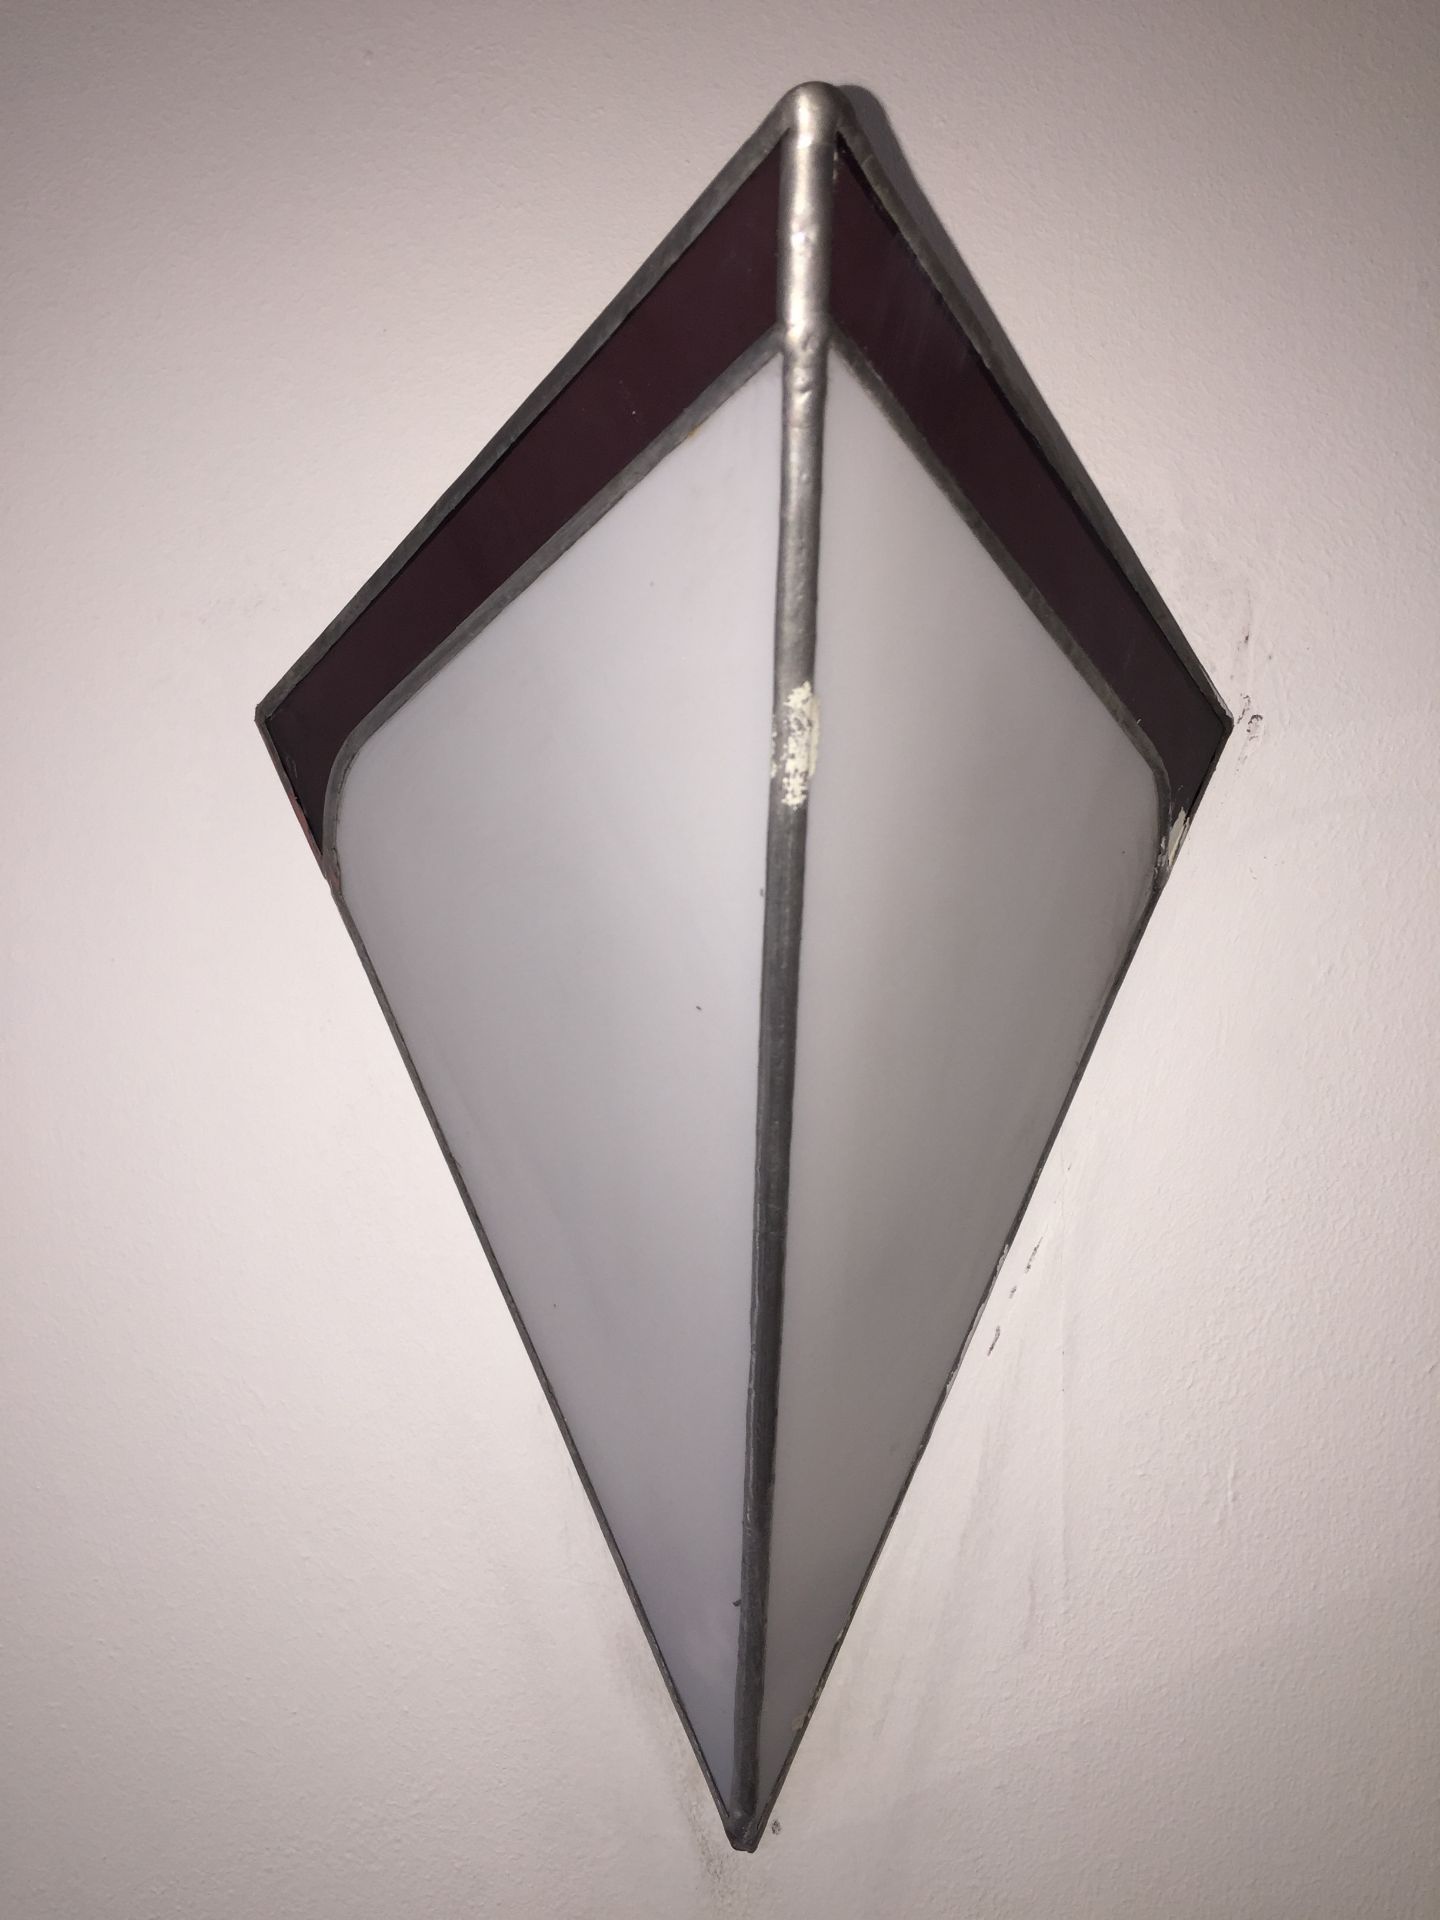 4 x Matching Art Deco Wall Lights With Stained Glass Shades - Dimensions: Height 35cm x 20cm x Depth - Bild 2 aus 4